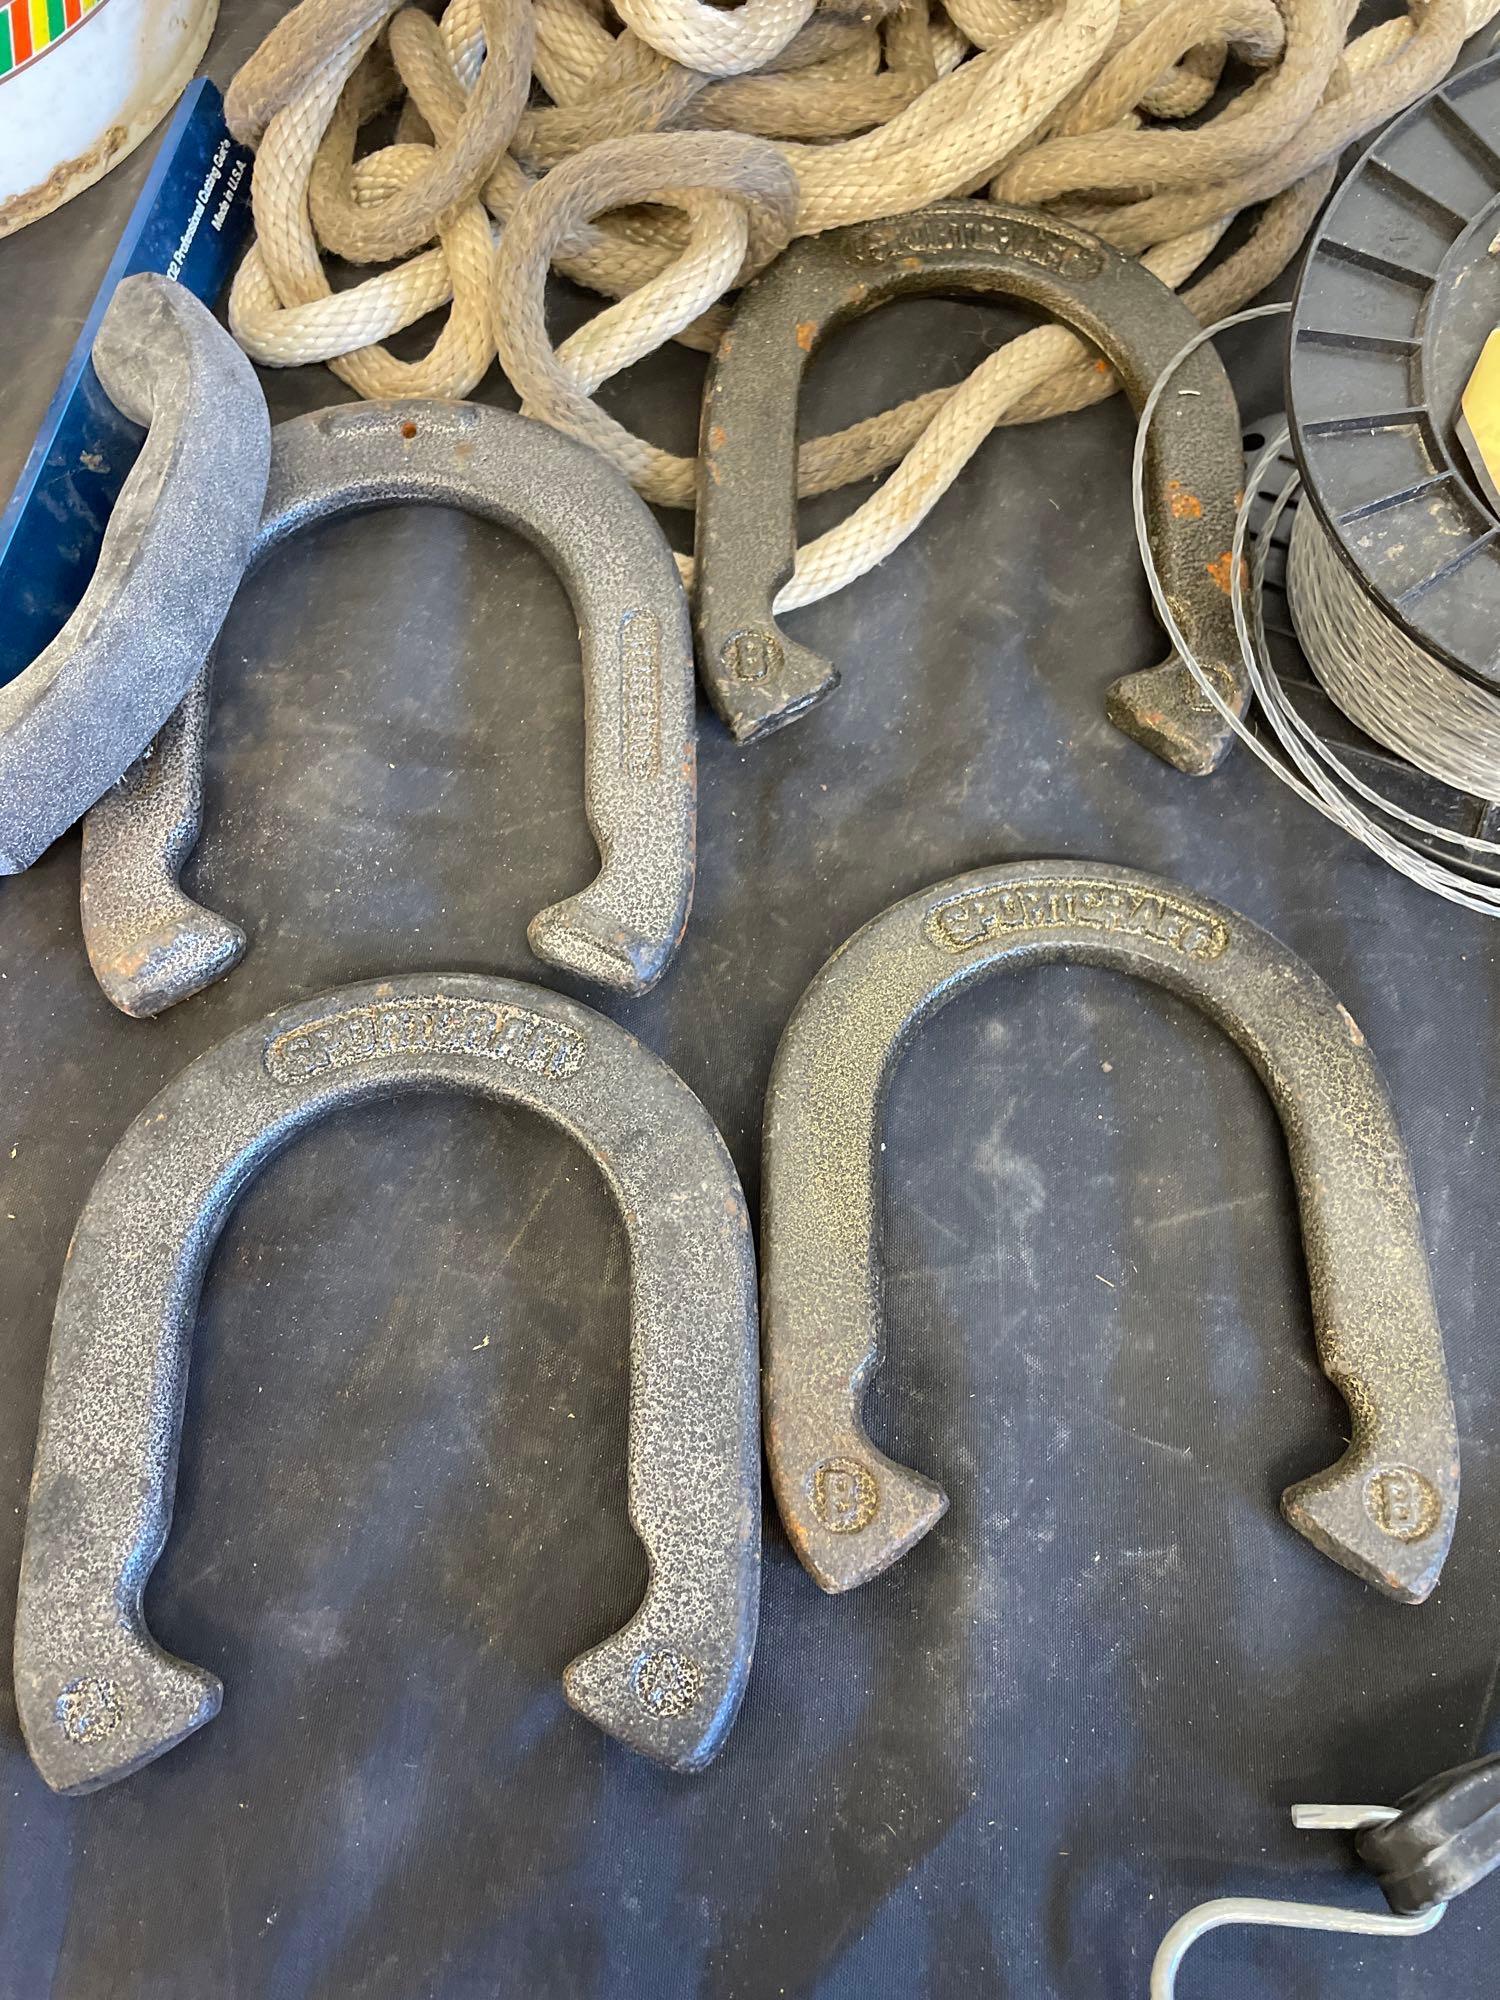 Chain, horseshoes and more